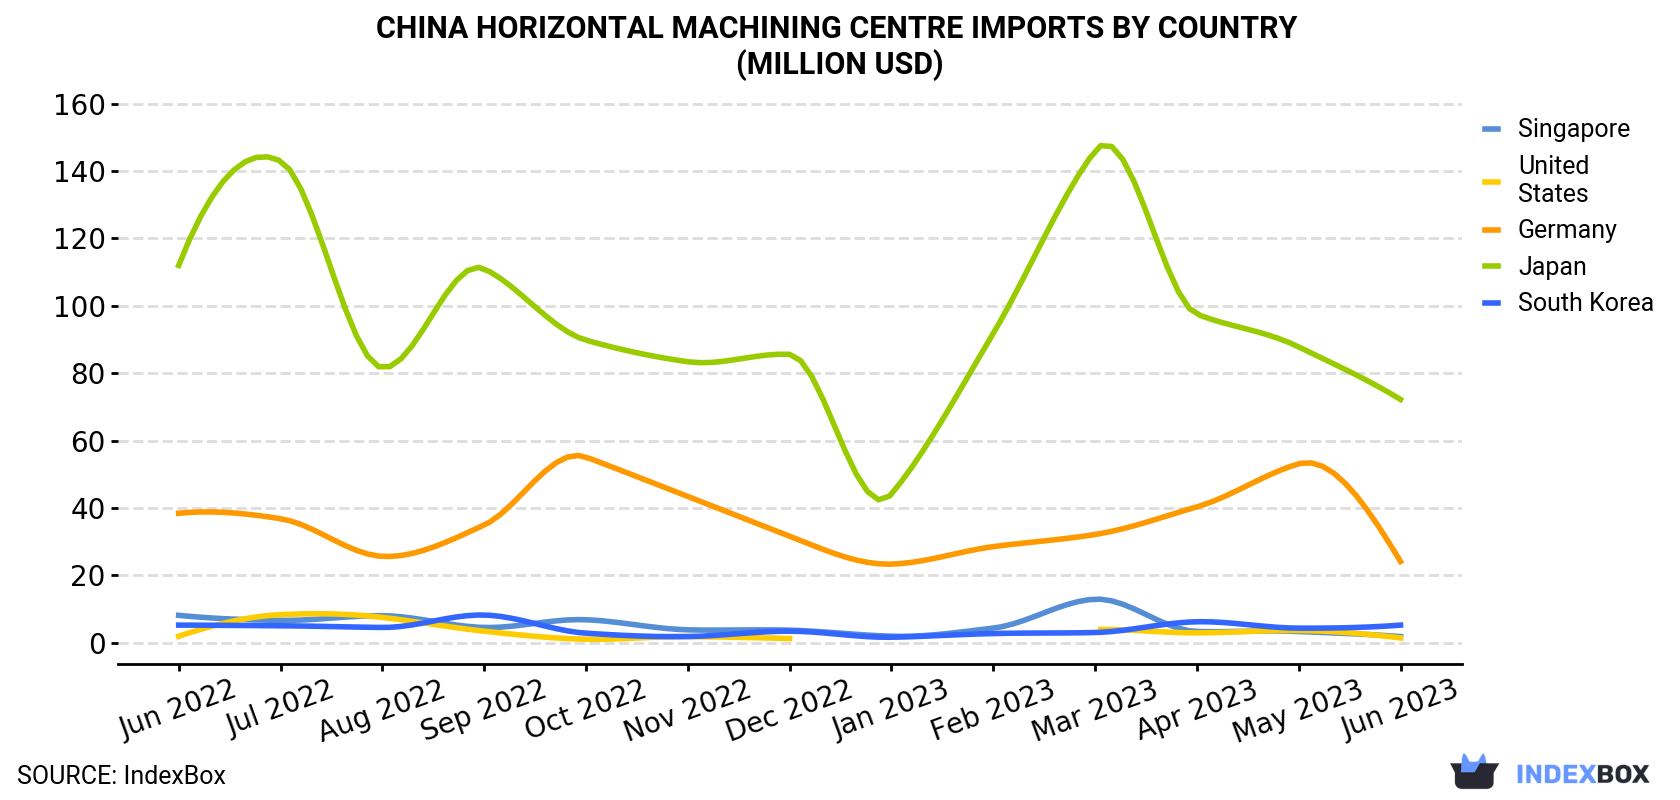 China Horizontal Machining Centre Imports By Country (Million USD)